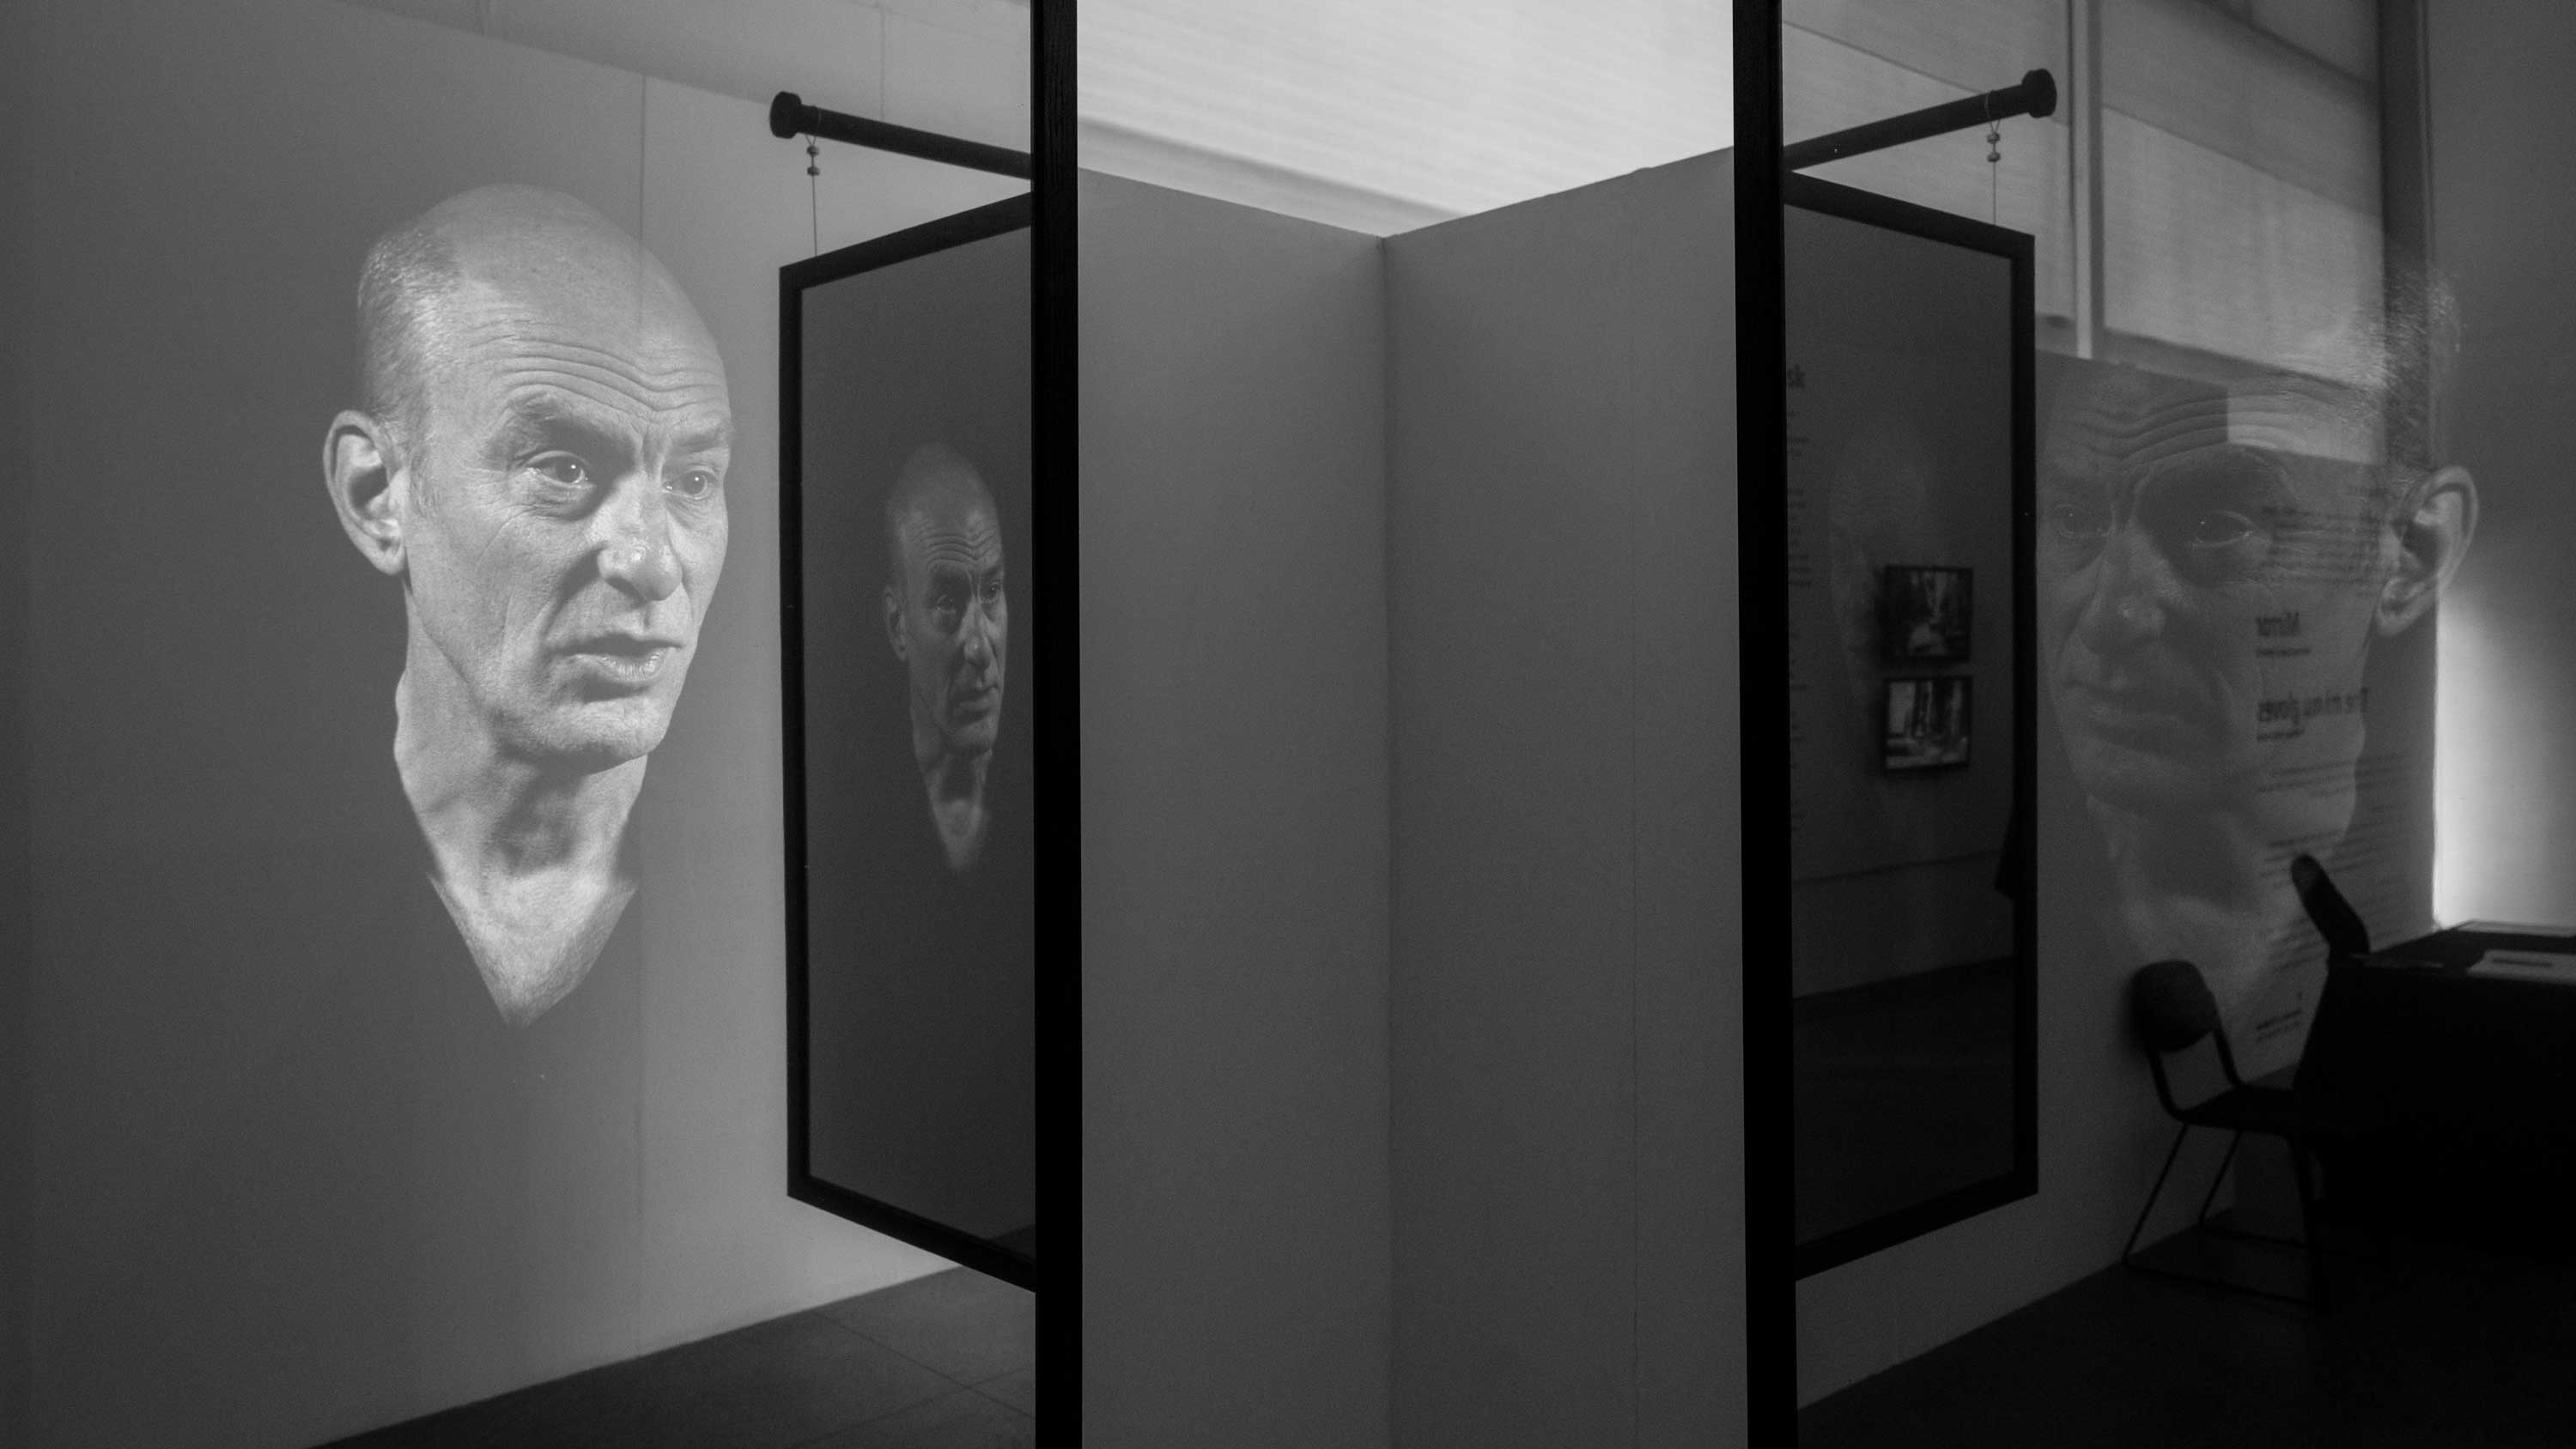 Installation of Mirror I by David Cotterrell - An image of a man is displayed on multiple screens